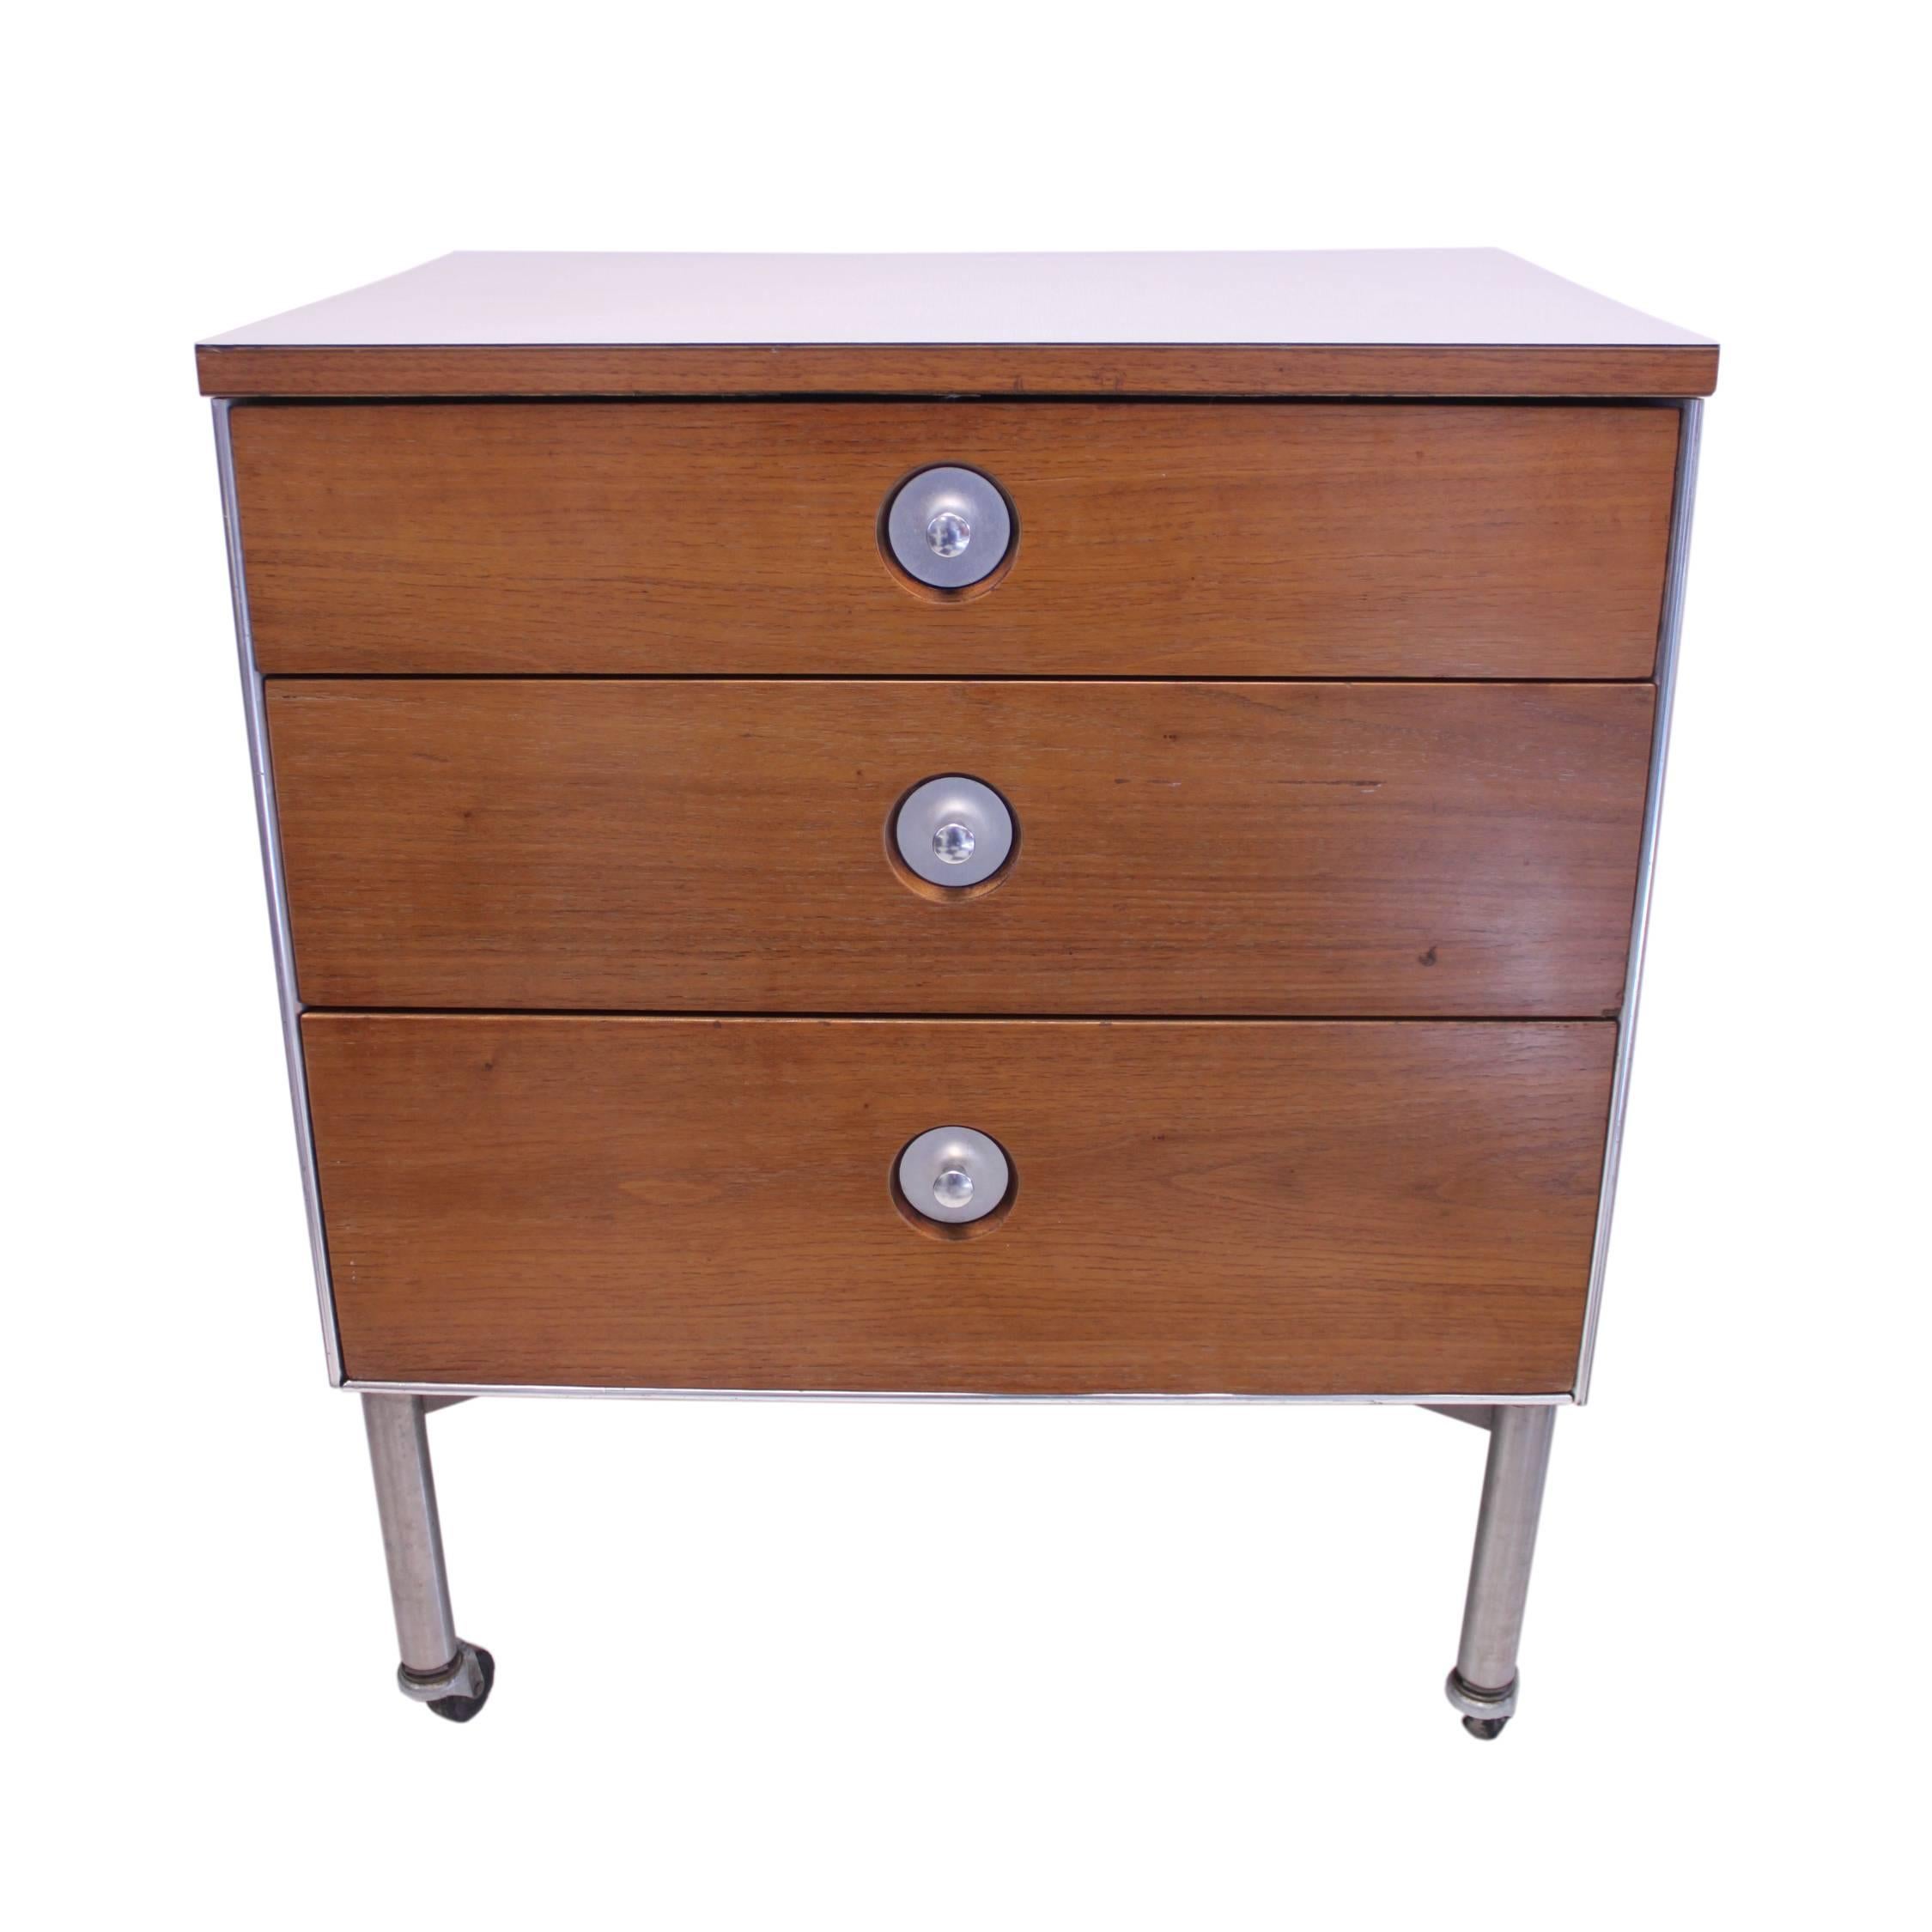 Mid-20th Century Pair of Mid-Century Modern End Table or Night Stands by Raymond Loewy